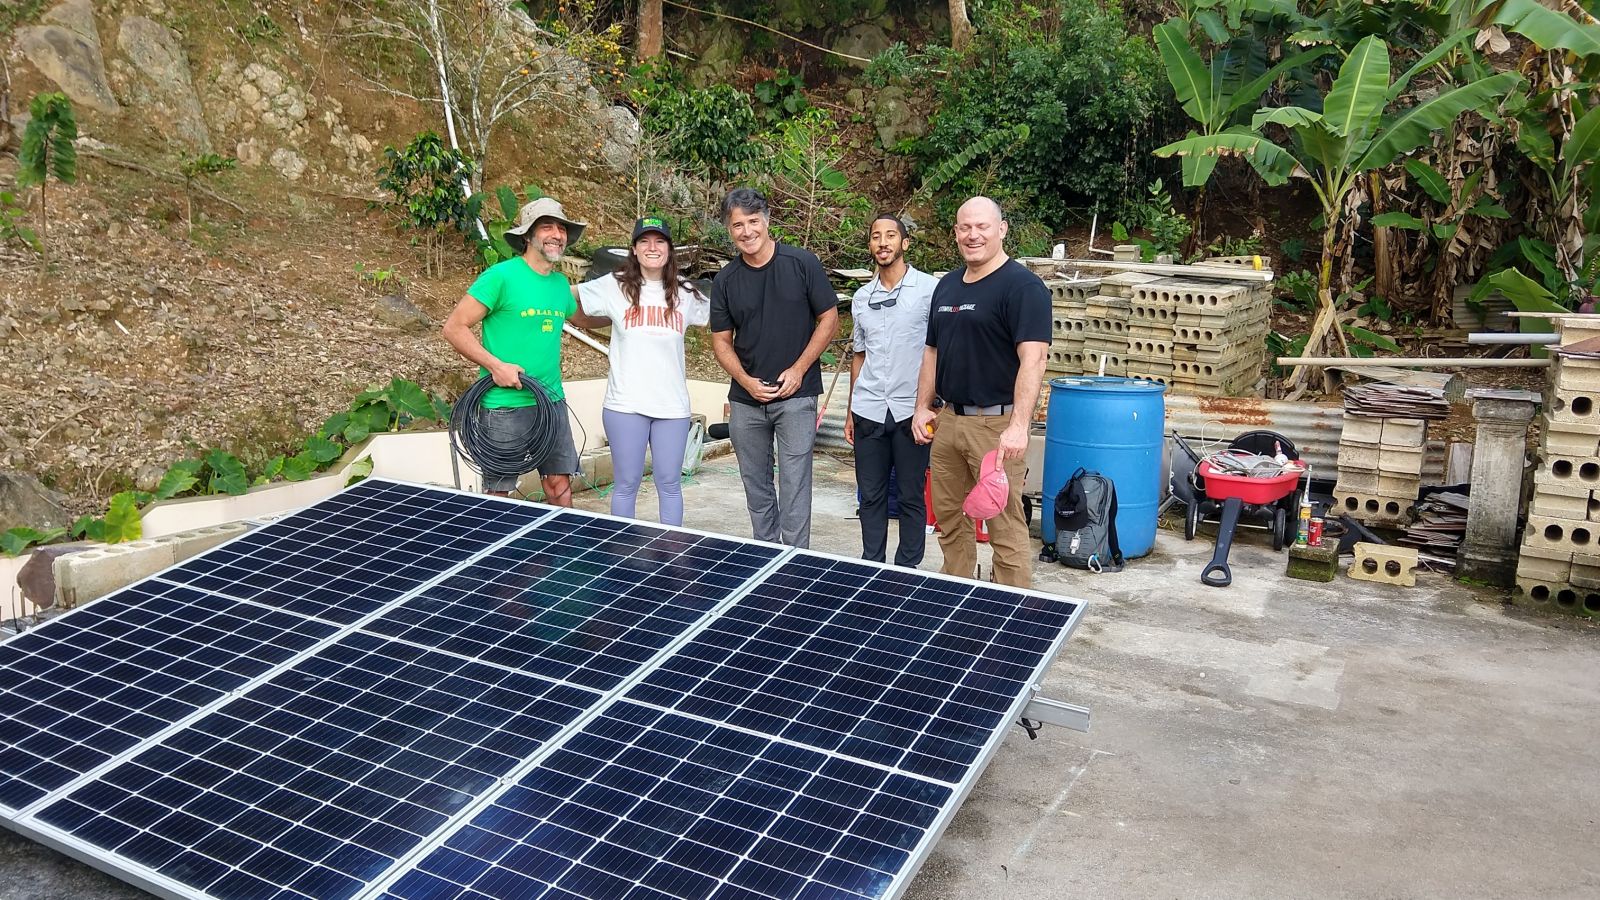 Together with Let’s Share the Sun executive director Bernadette Jordan and other volunteers, Solar Landscape’s John Moran installed solar panels and batteries on homes in Puerto Rico.